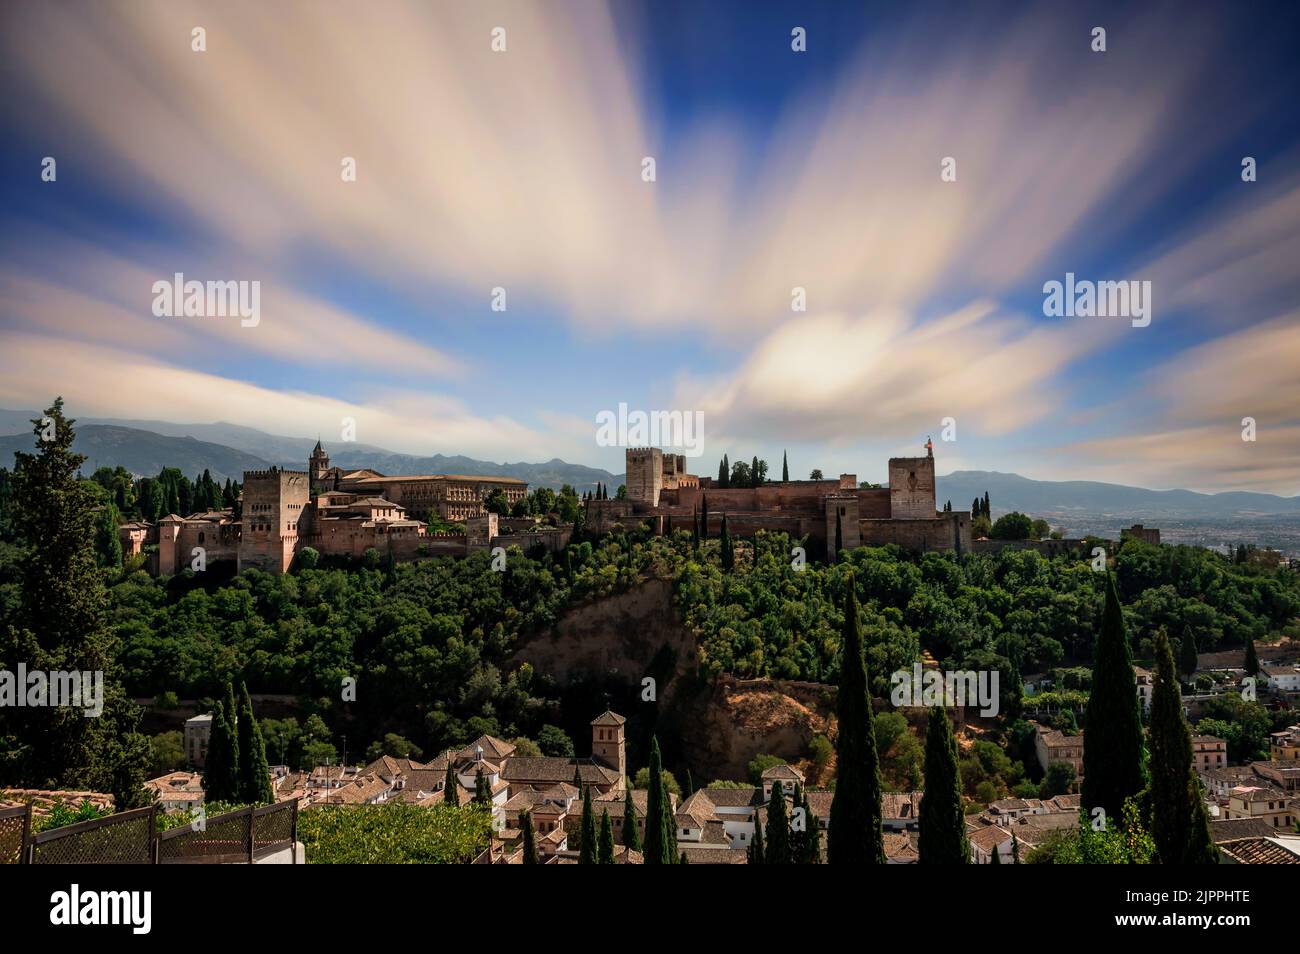 The Glorious Alhamra (Alhambra) Palace, Granada, Spain. The magnificent structure was built in 889 AD during the Muslim rule over Spain. Stock Photo